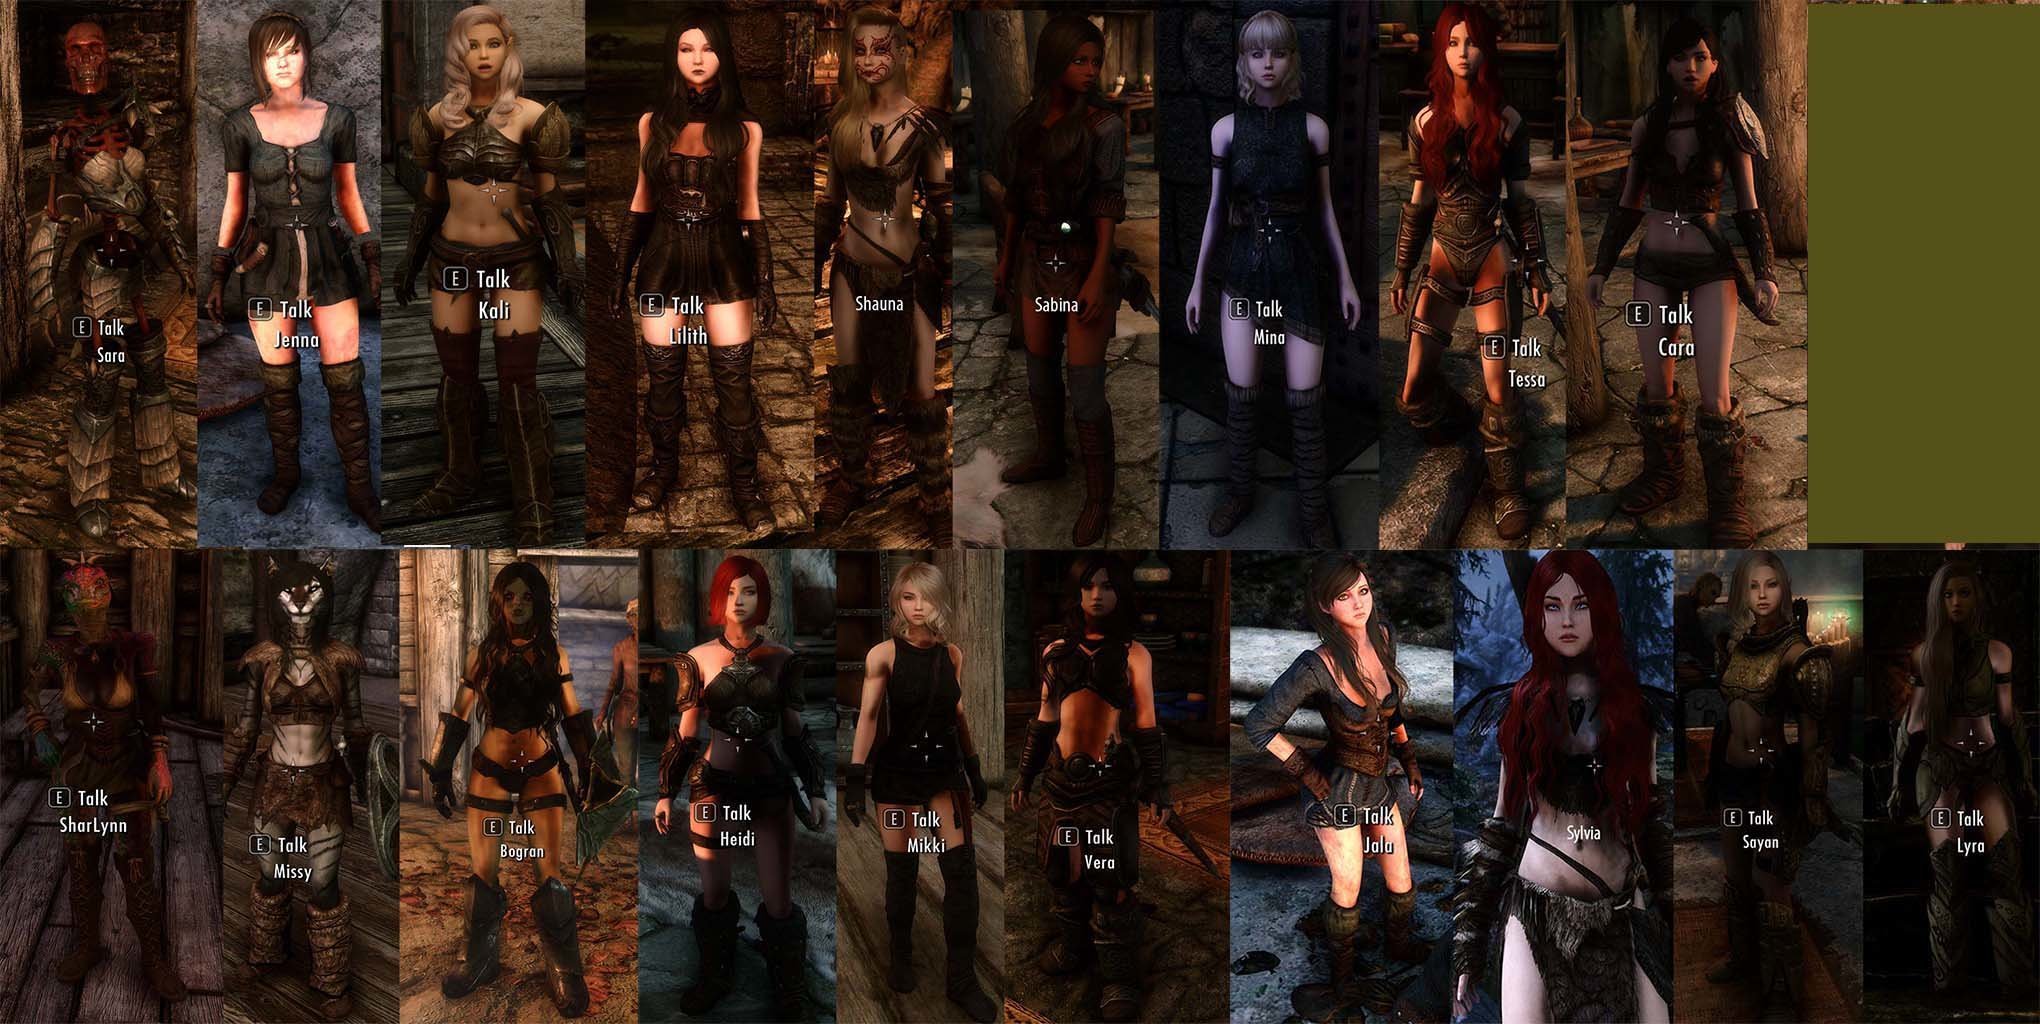 Released My Version Of Sassy Teen Girls Mod Sse Only Skyrim Special Edition...